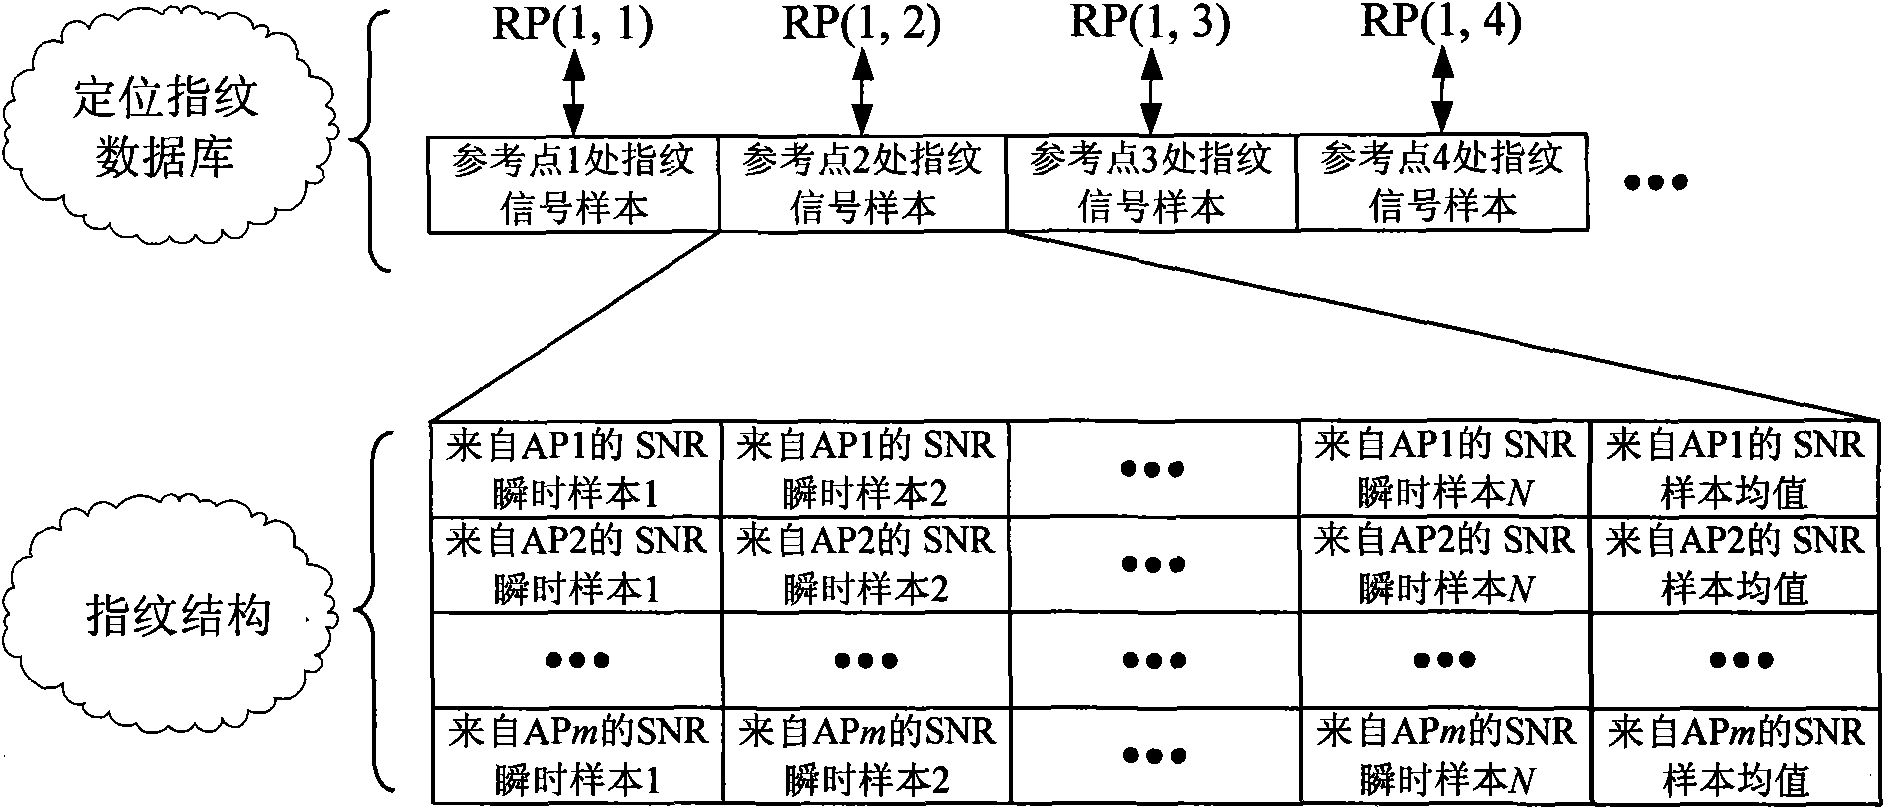 Method for optimizing WLAN (Wireless Local Area Network) indoor ANN (Artificial Neural Network) positioning based on FCM (fuzzy C-mean) and least-squares curve surface fitting methods